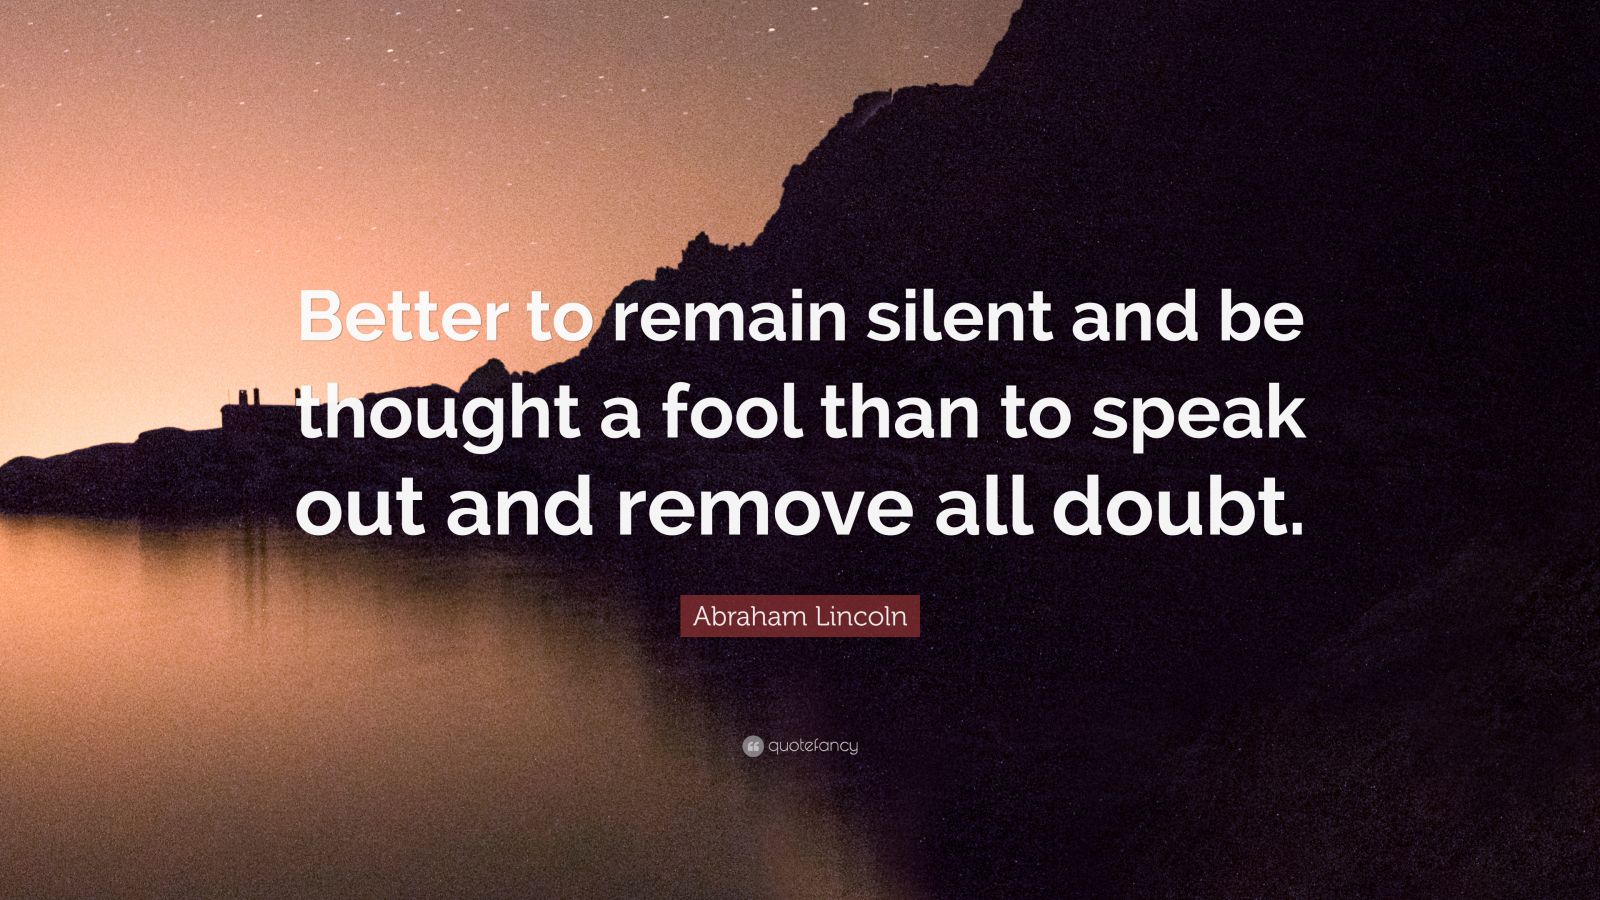 Abraham Lincoln Quote: “Better to remain silent and be thought a fool